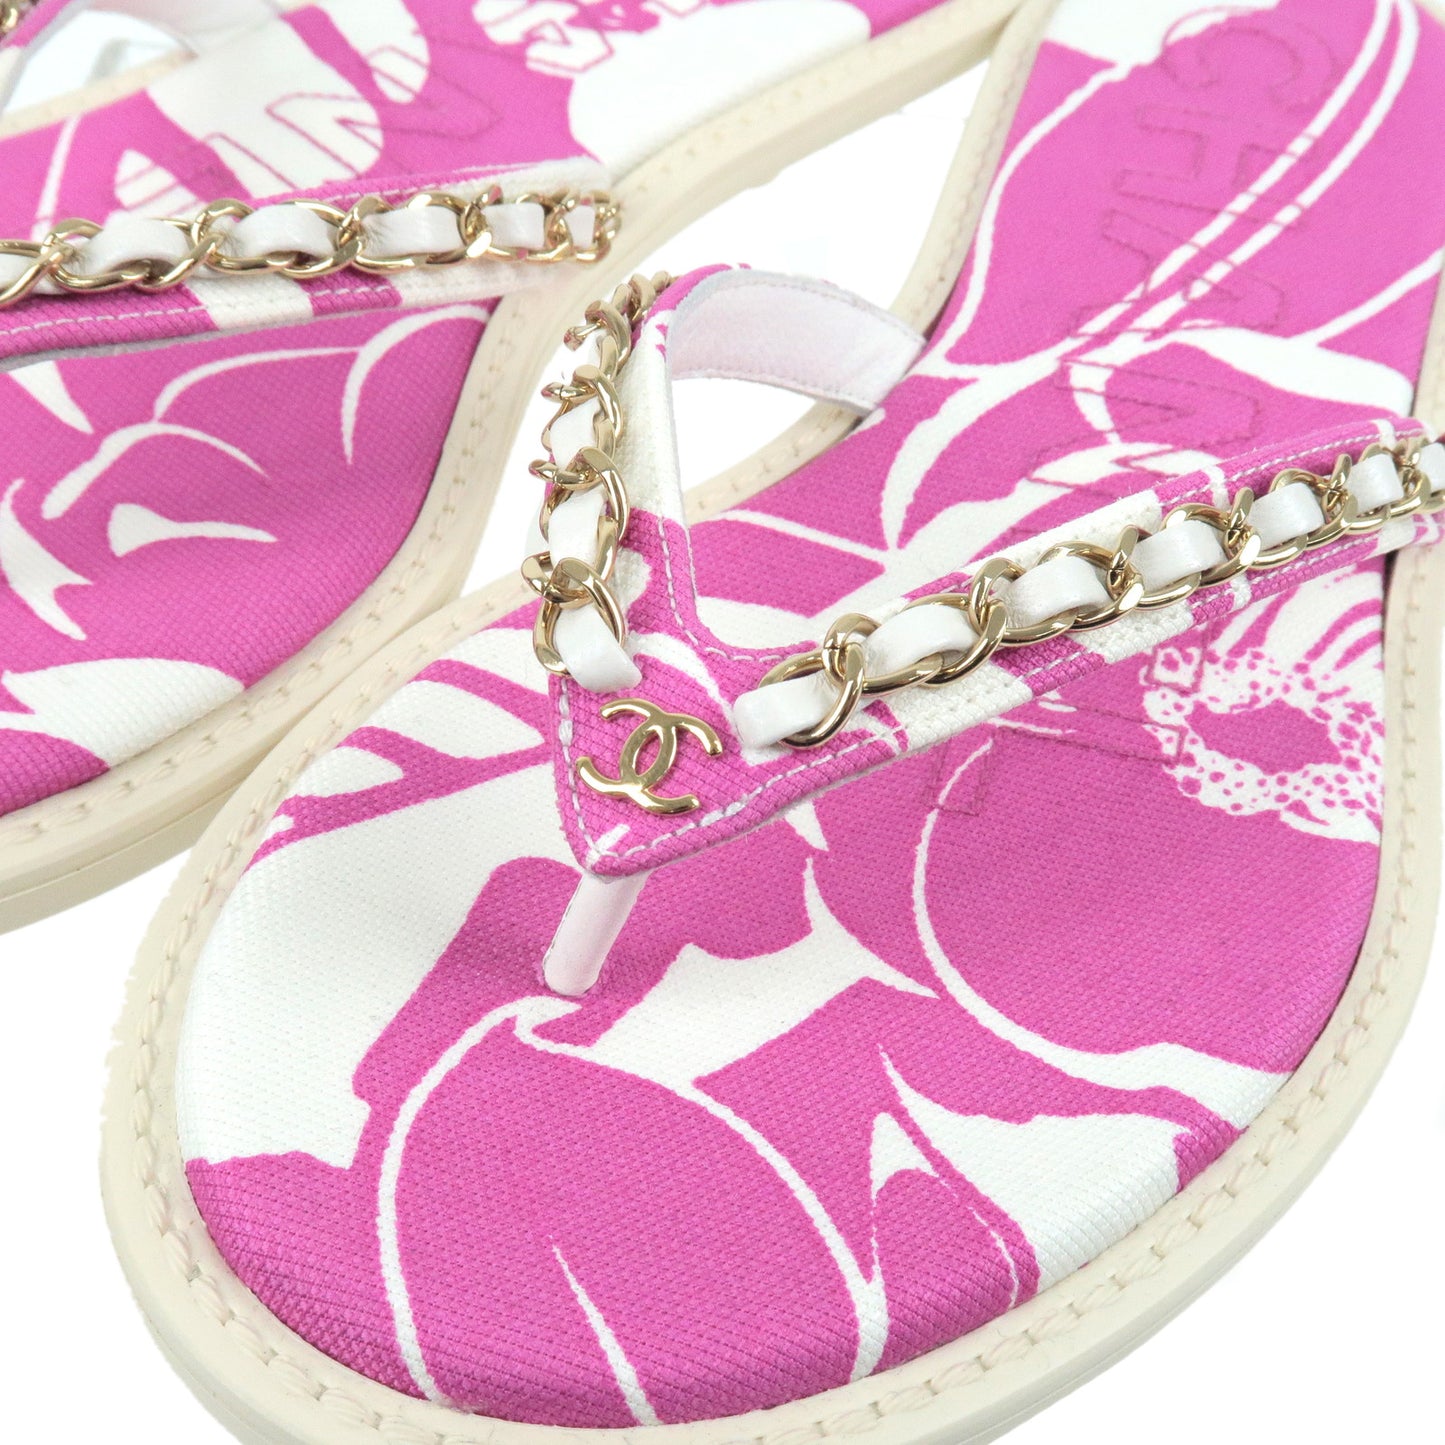 CHANEL Coco Beach Flip Flop Canvas Leather Pink US5.5 EUR36 G35965 Used